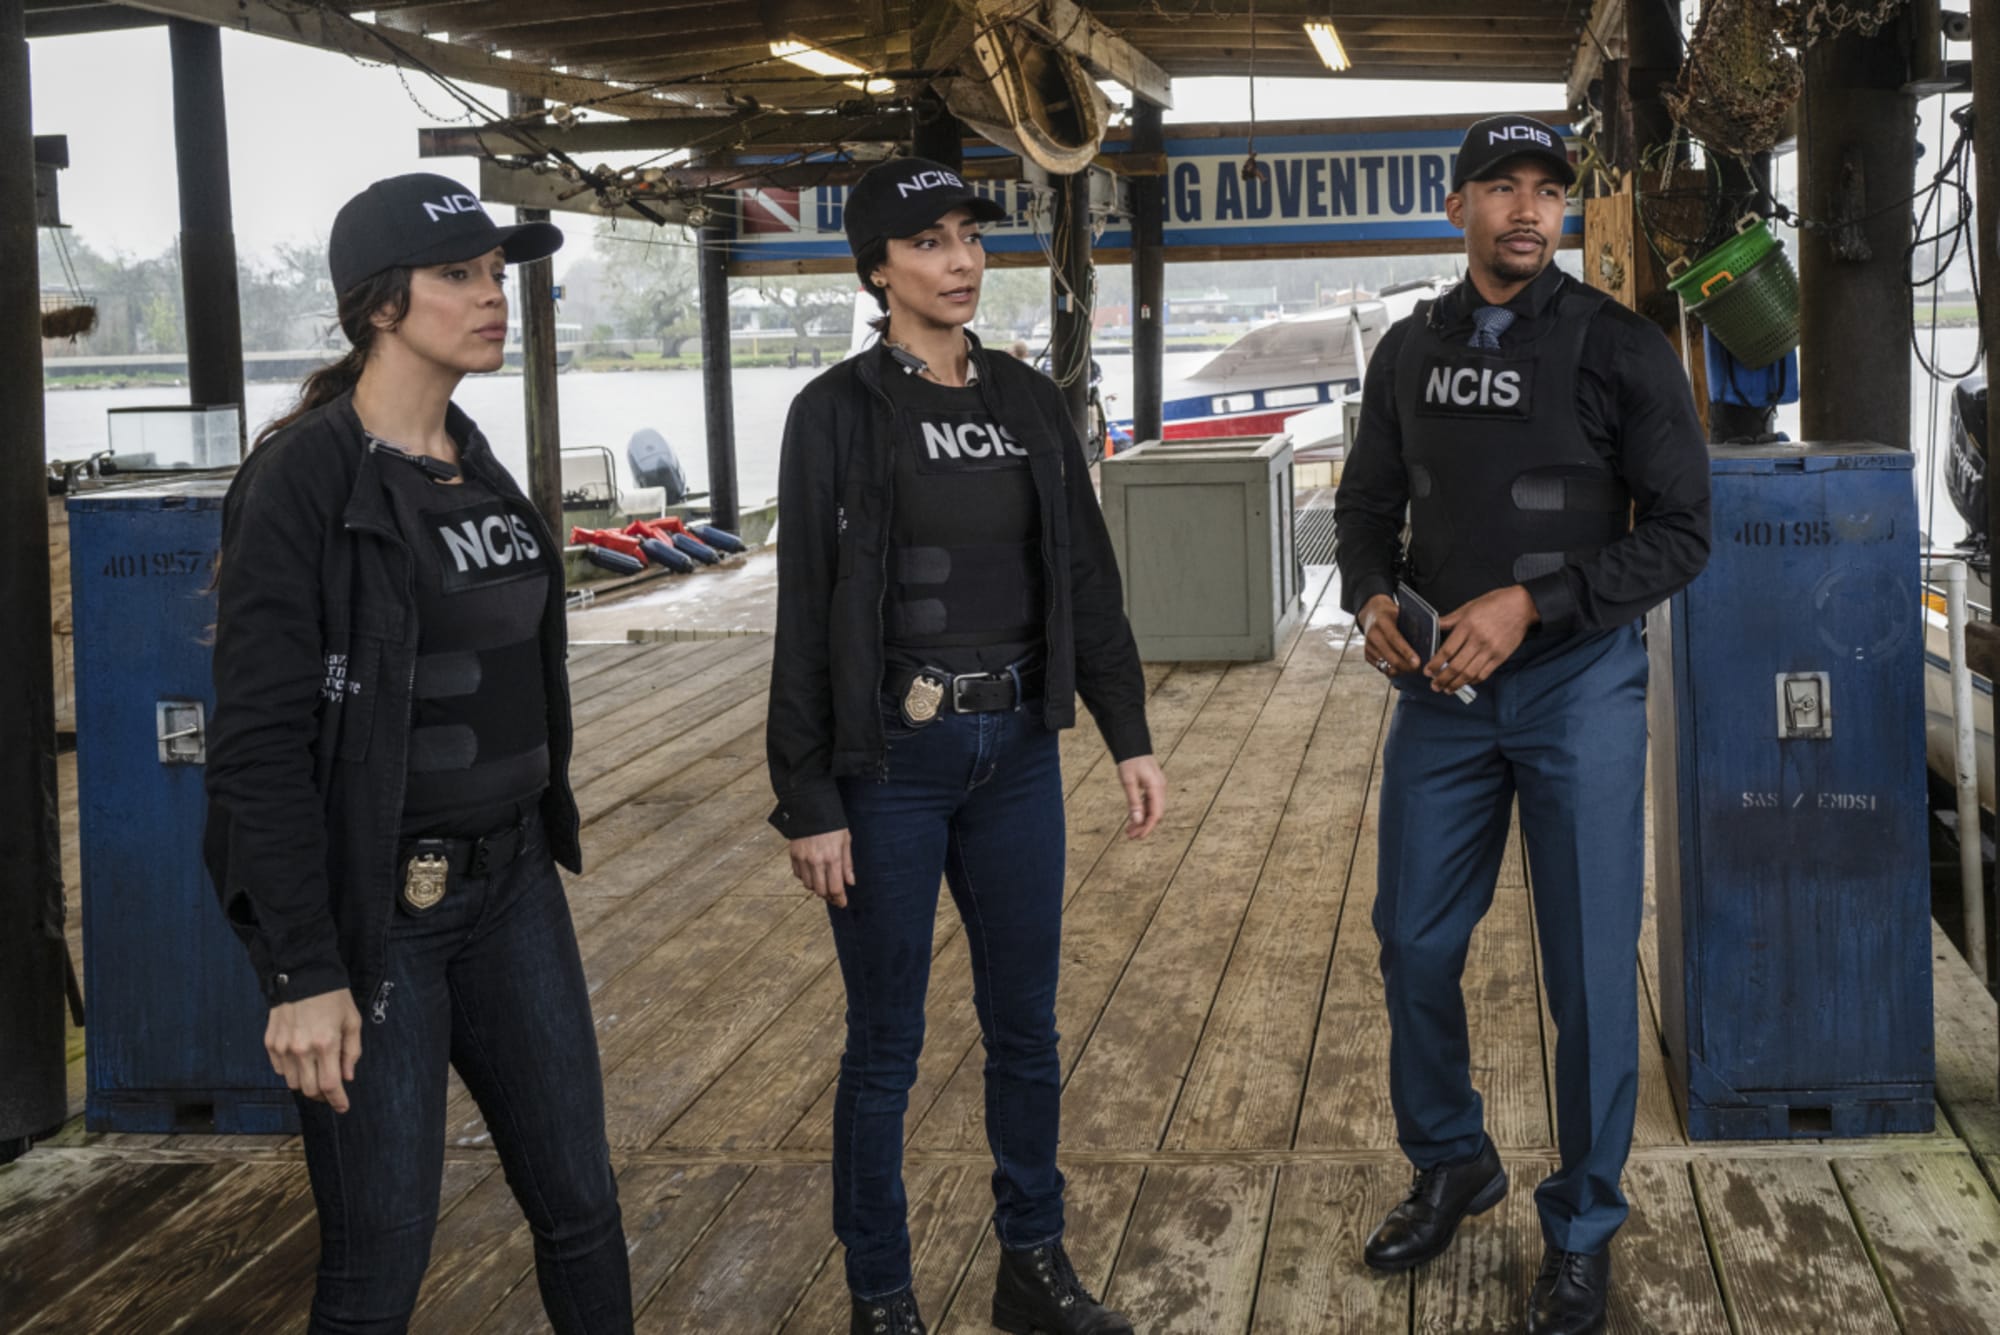 Ncis New Orleans Filming Schedule 2022 Ncis: New Orleans Season 7 Sets Tentative September Filming Date